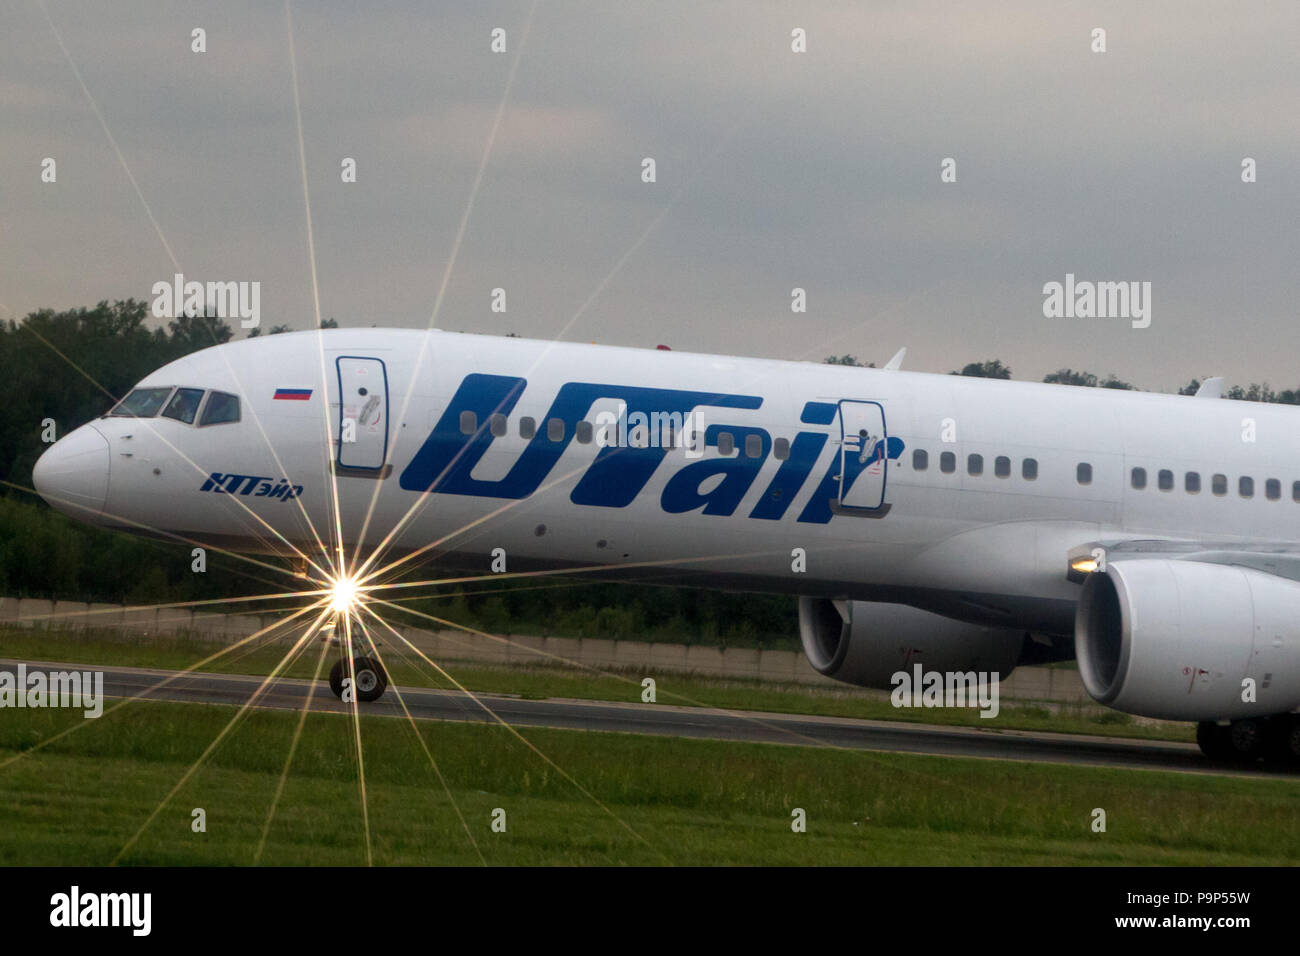 The Boeing-757 civil jet airplane of UTair Aviation seen on a taxiway of Domodedovo Airport, Moscow, Russia. Stock Photo